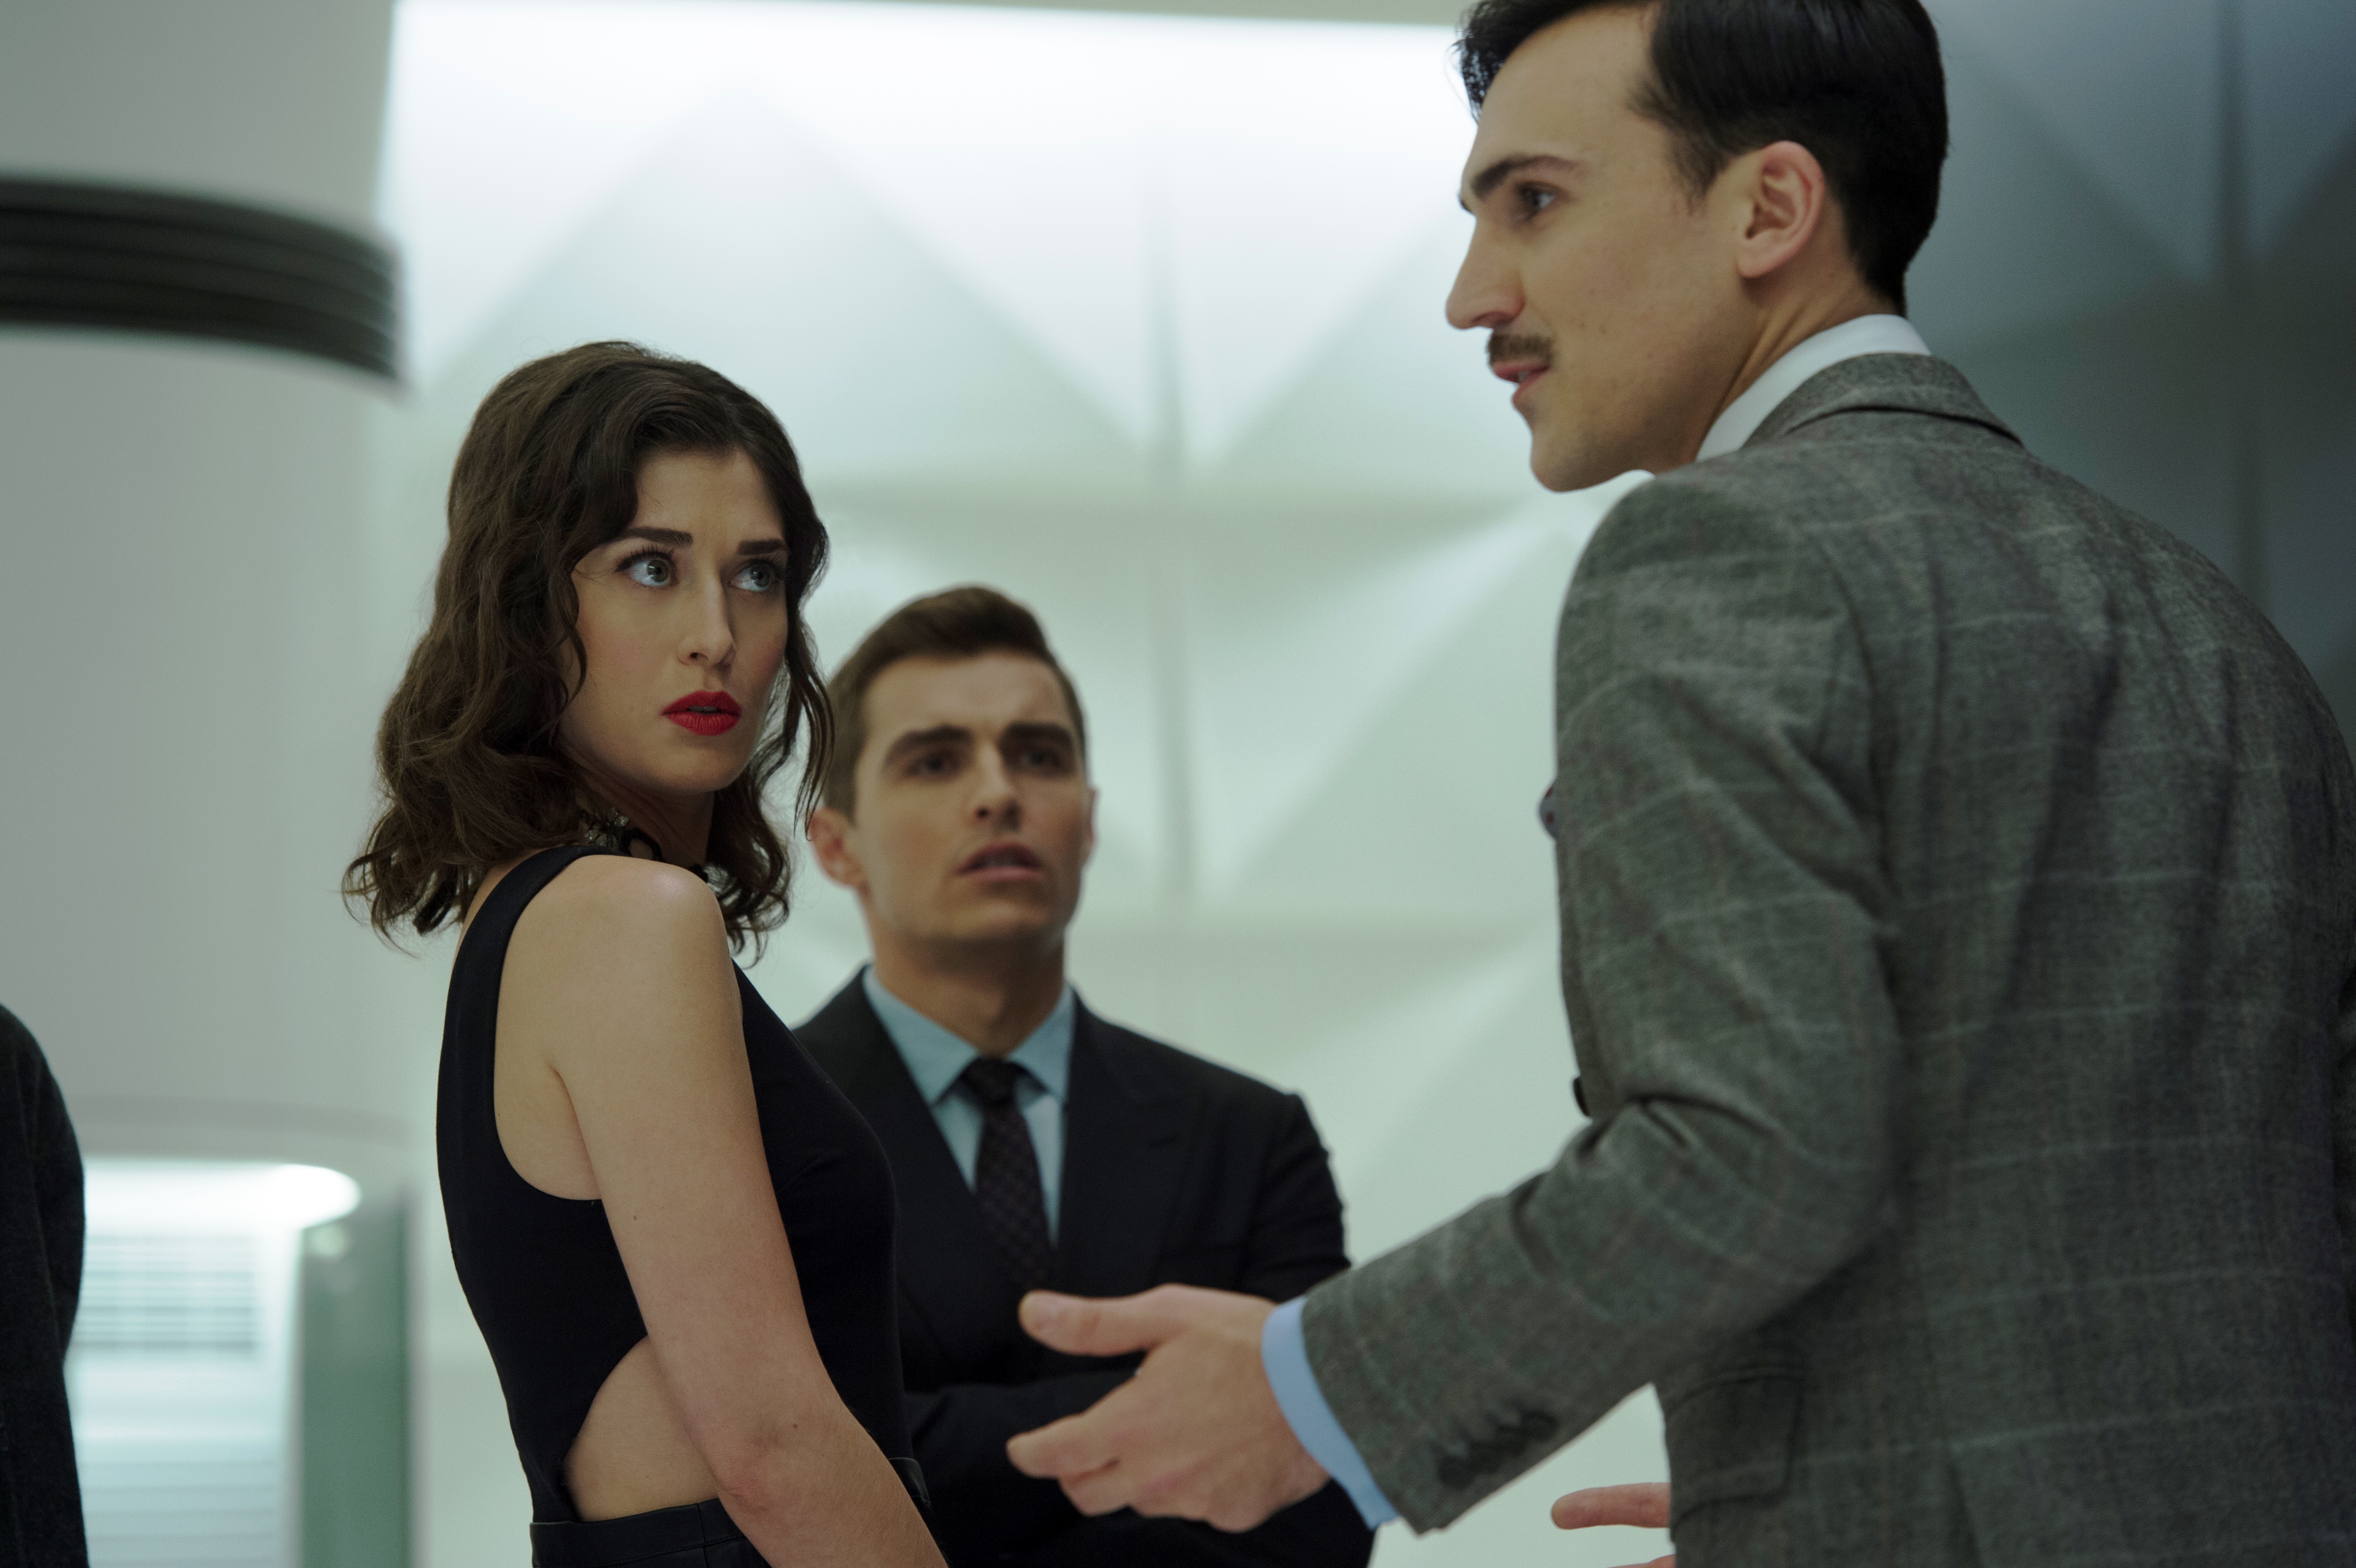 Now You See Me 2 Lizzy Caplan Lula Now You See Me Dave Franco Jack Wilder Henry Lloyd Hughes 4928x3280